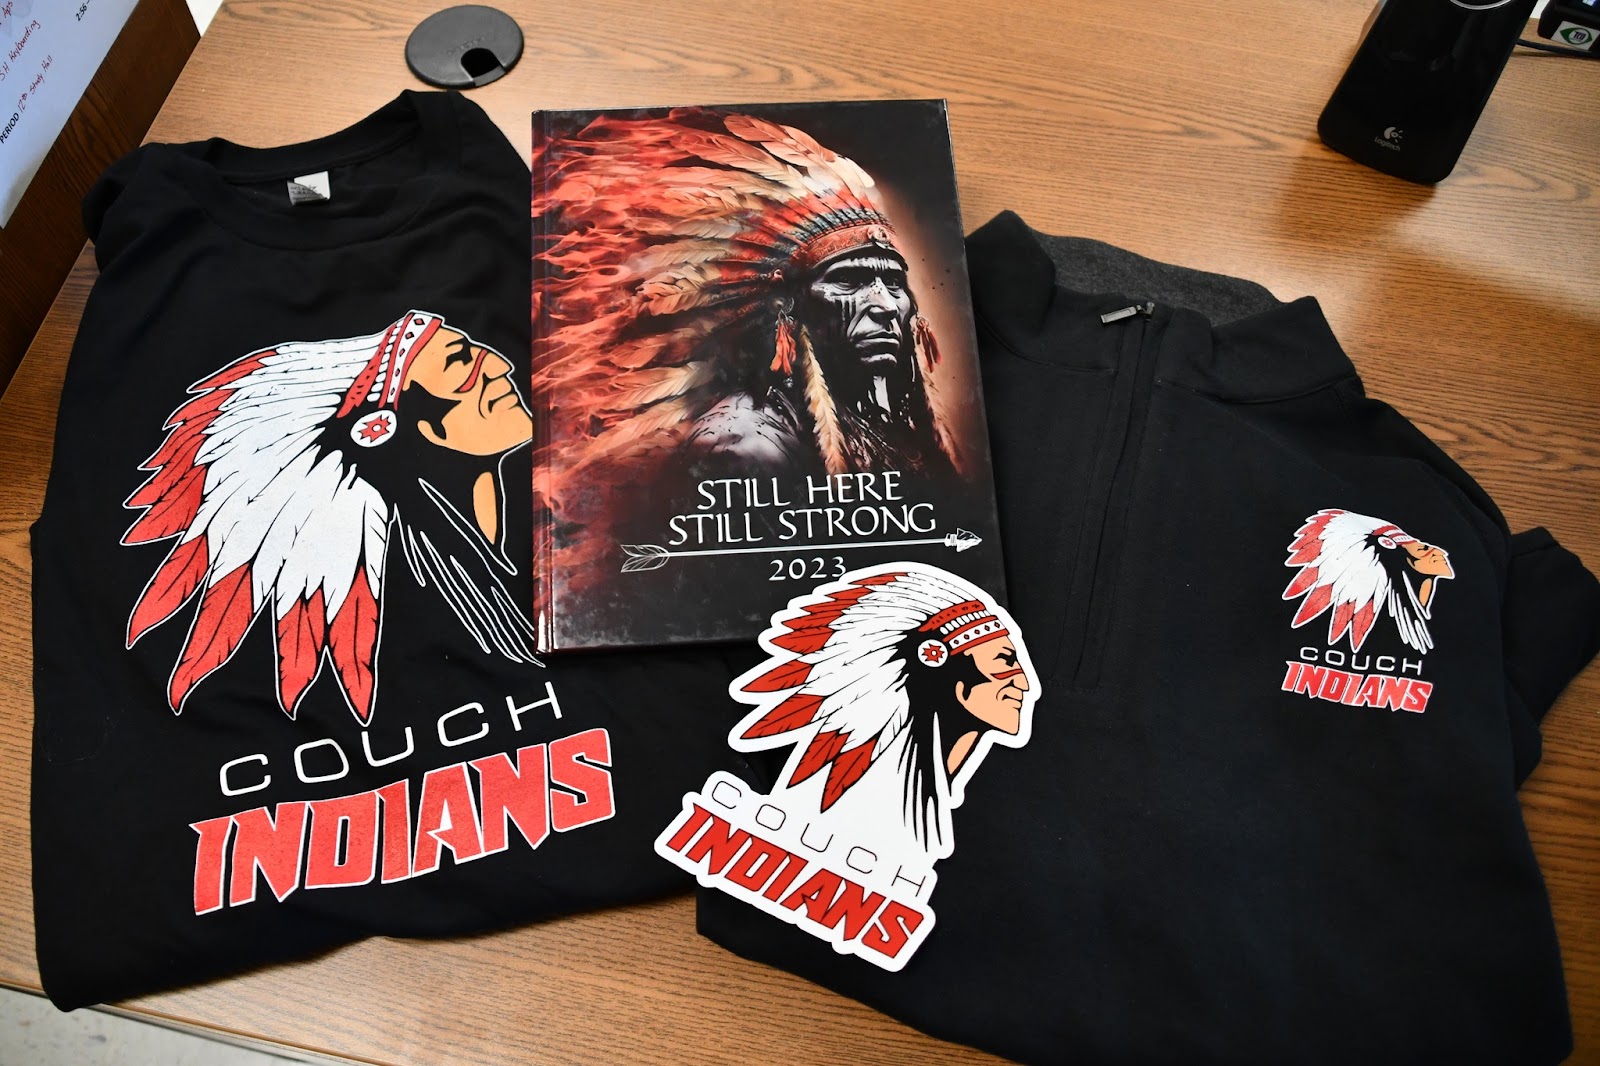 Couch Indian logo branded items on table, including shirts, stickers, yearbook